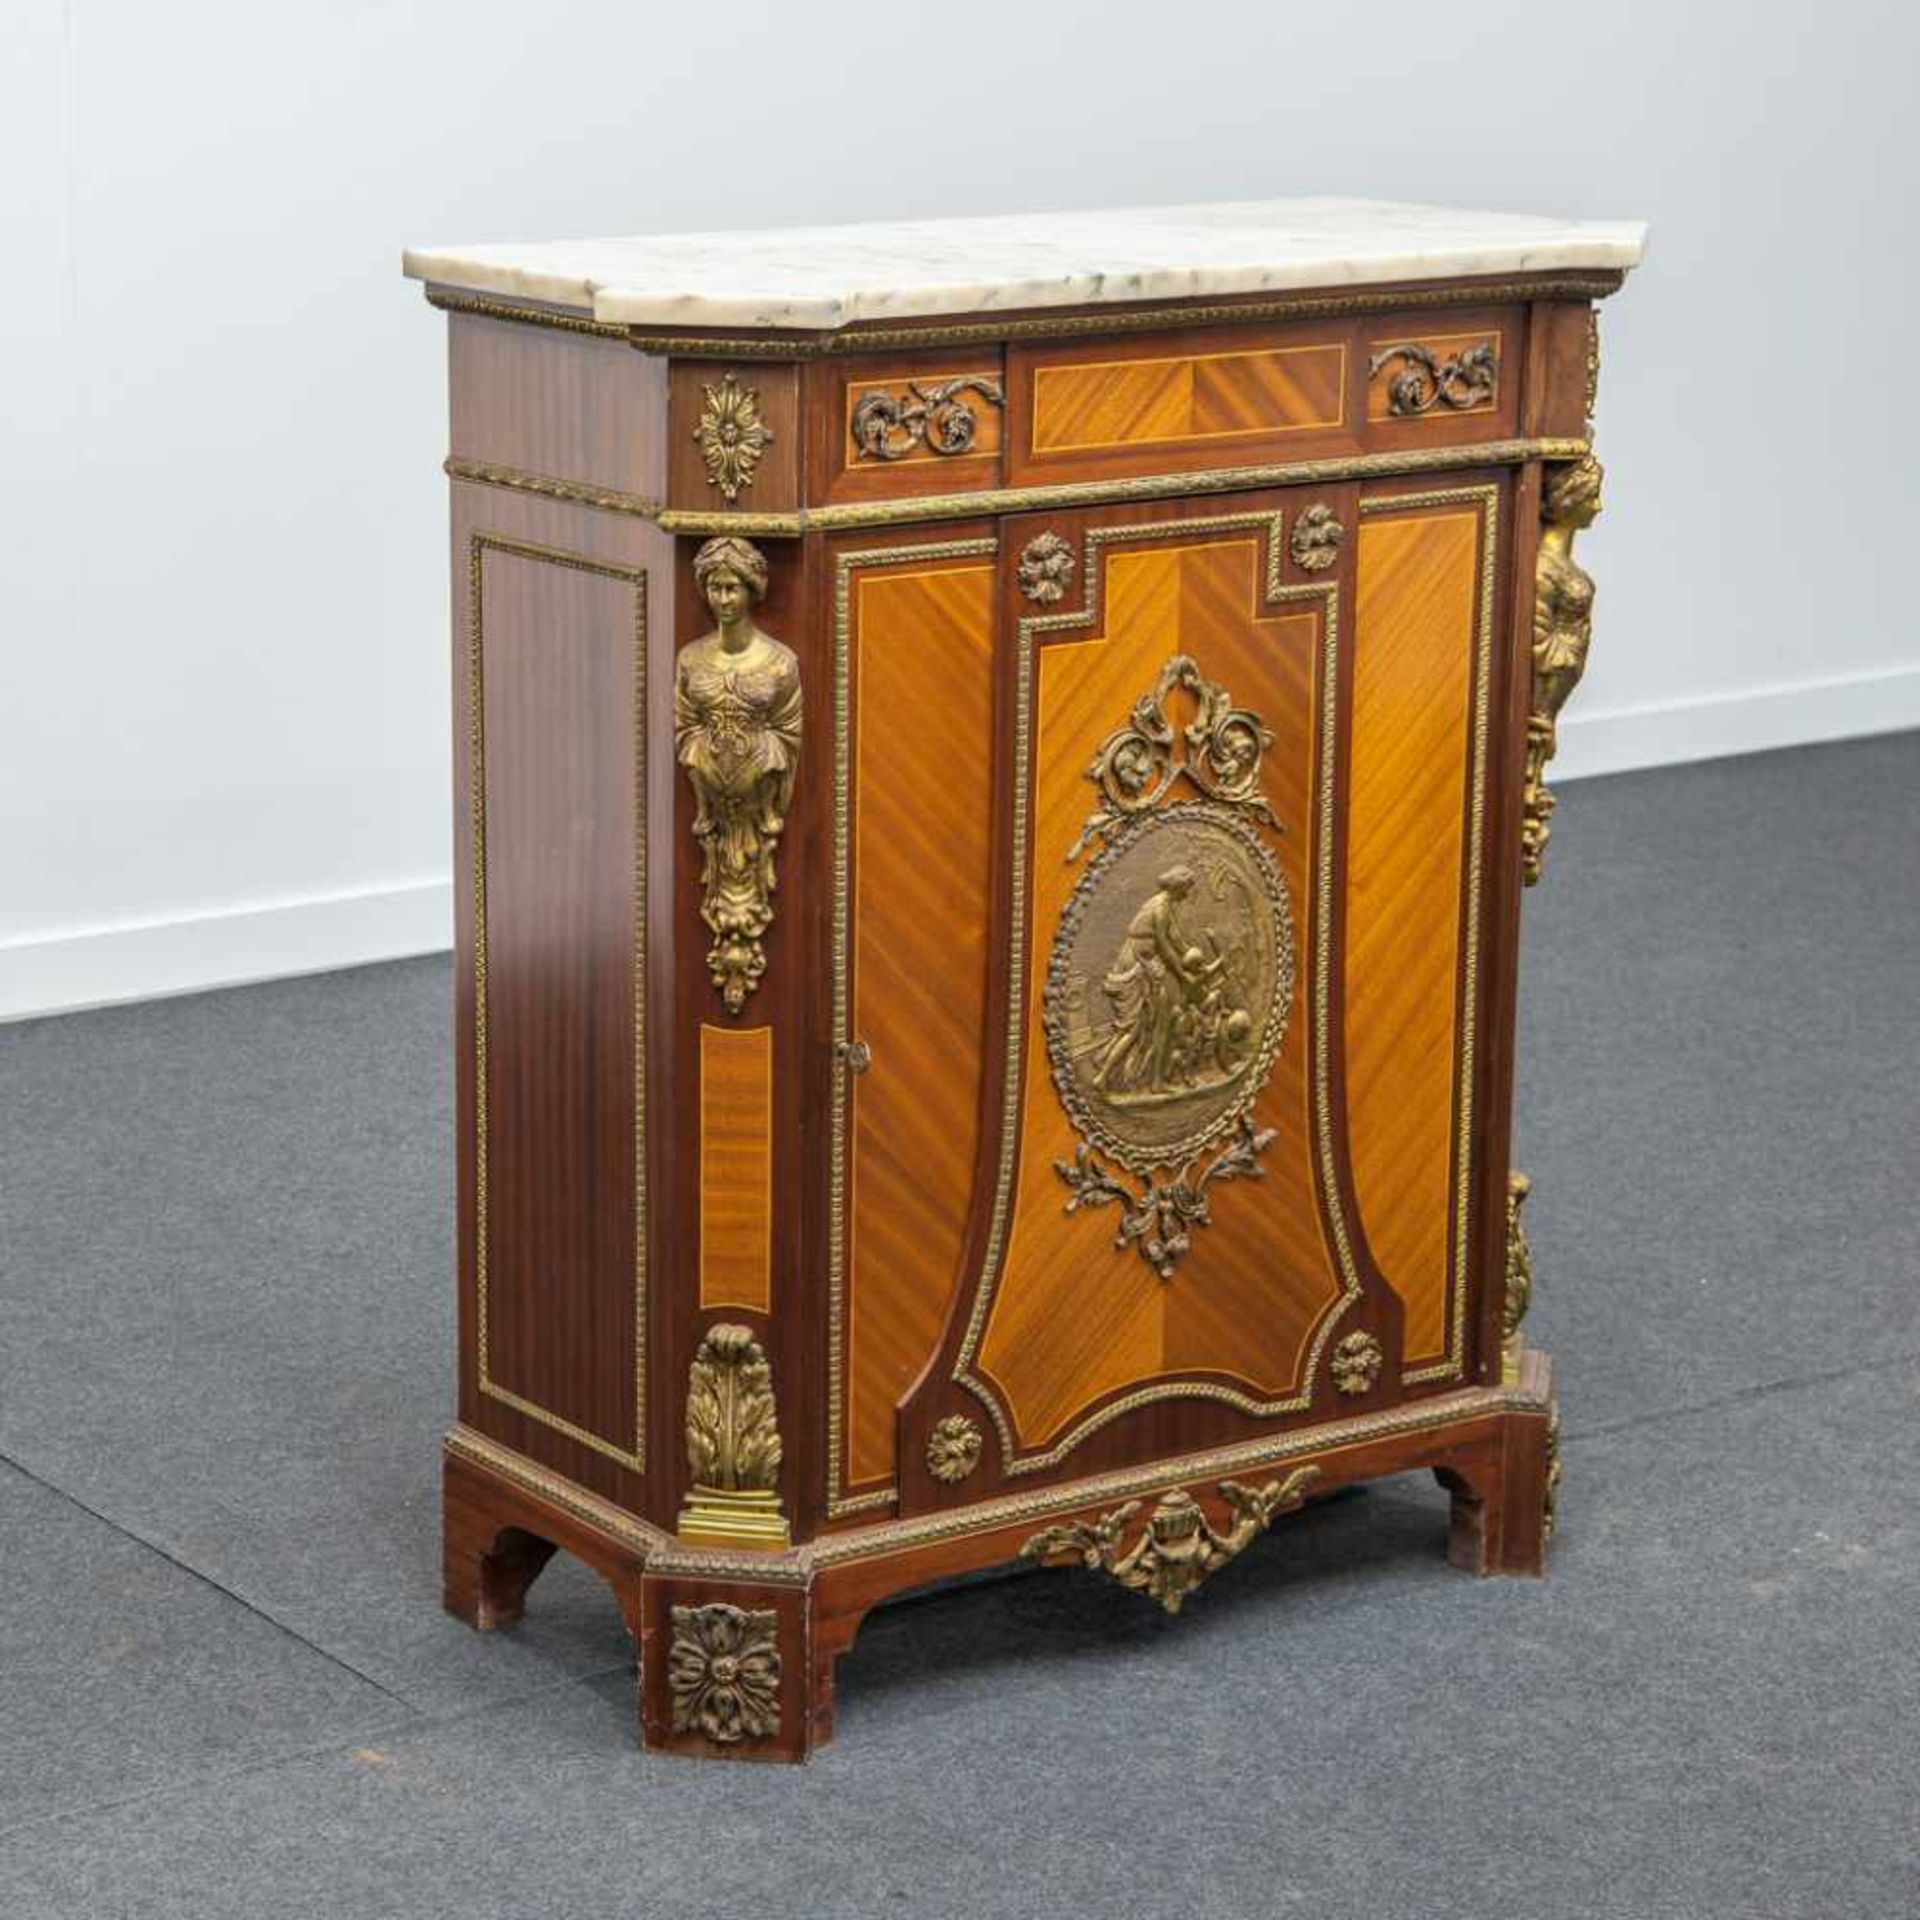 Commode with marquetry inlay